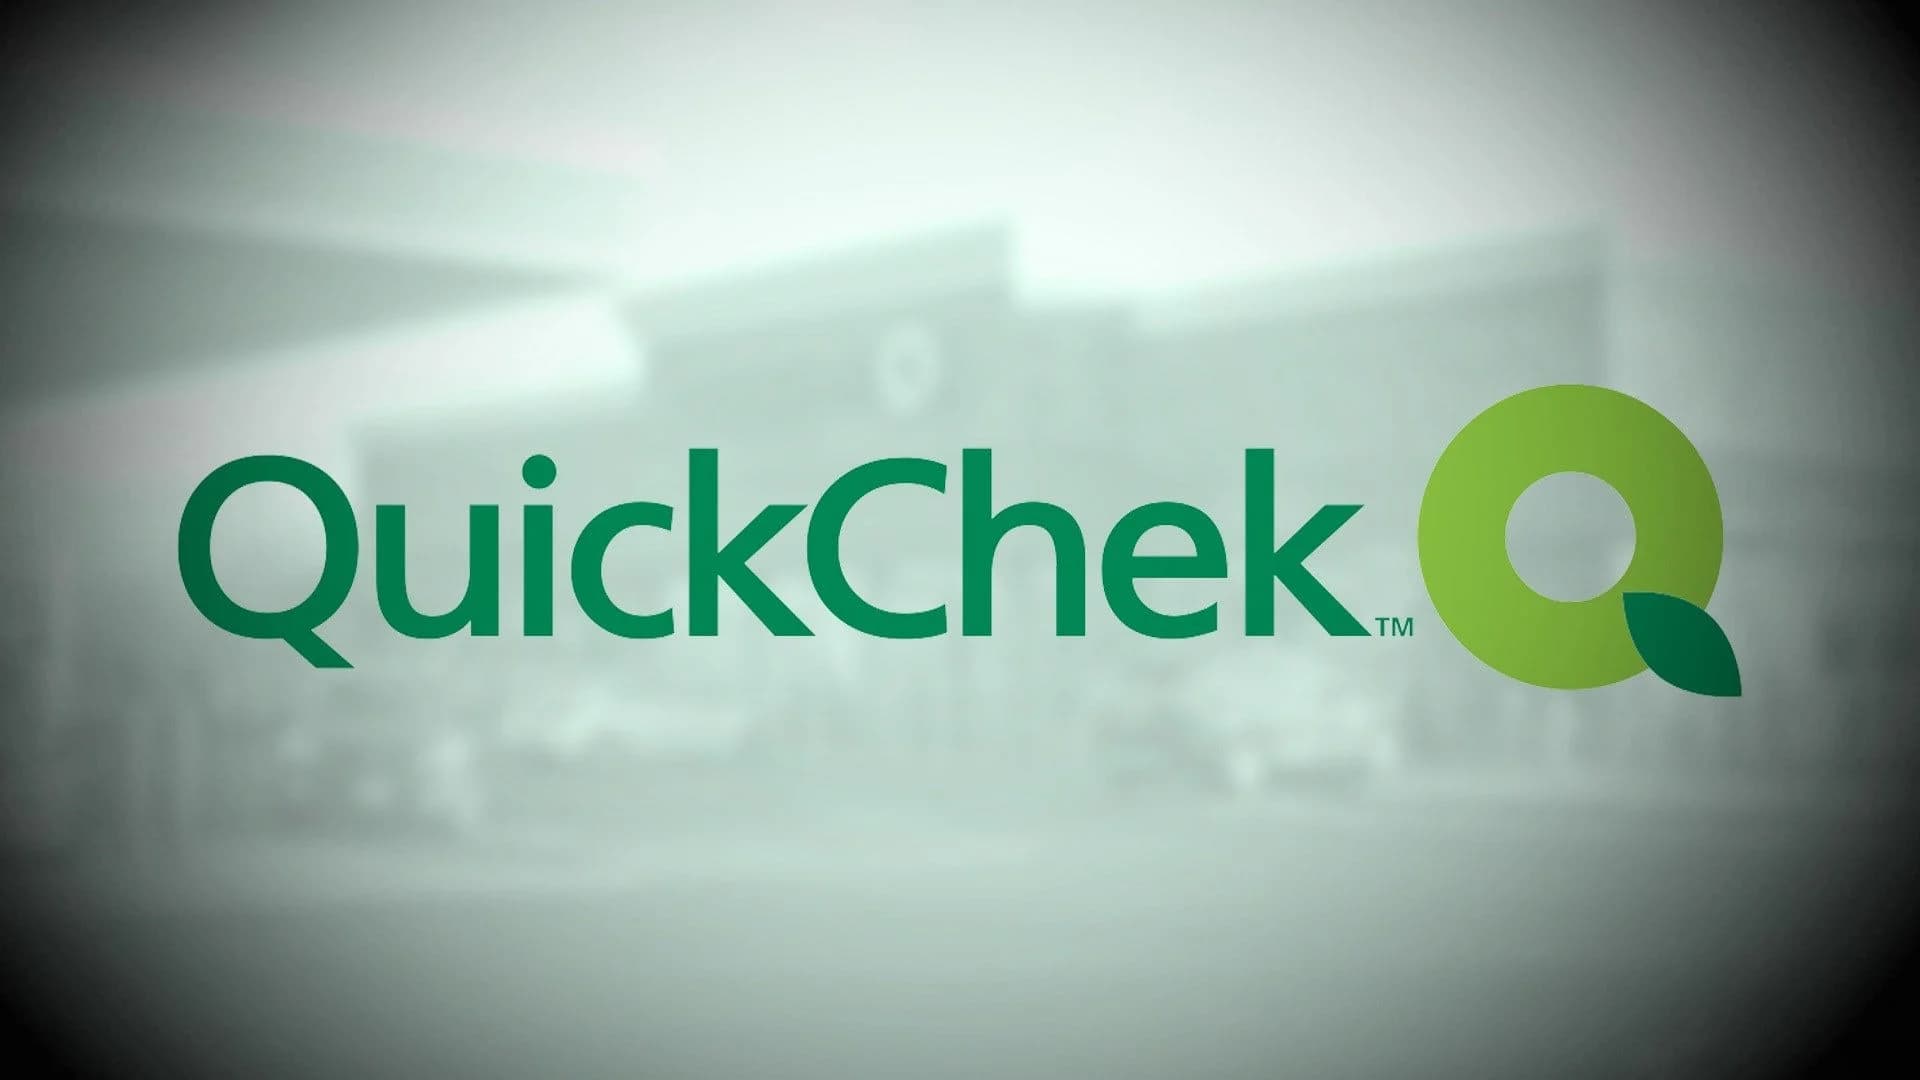 QuickChek location in New Jersey to close while 2 more expected to open